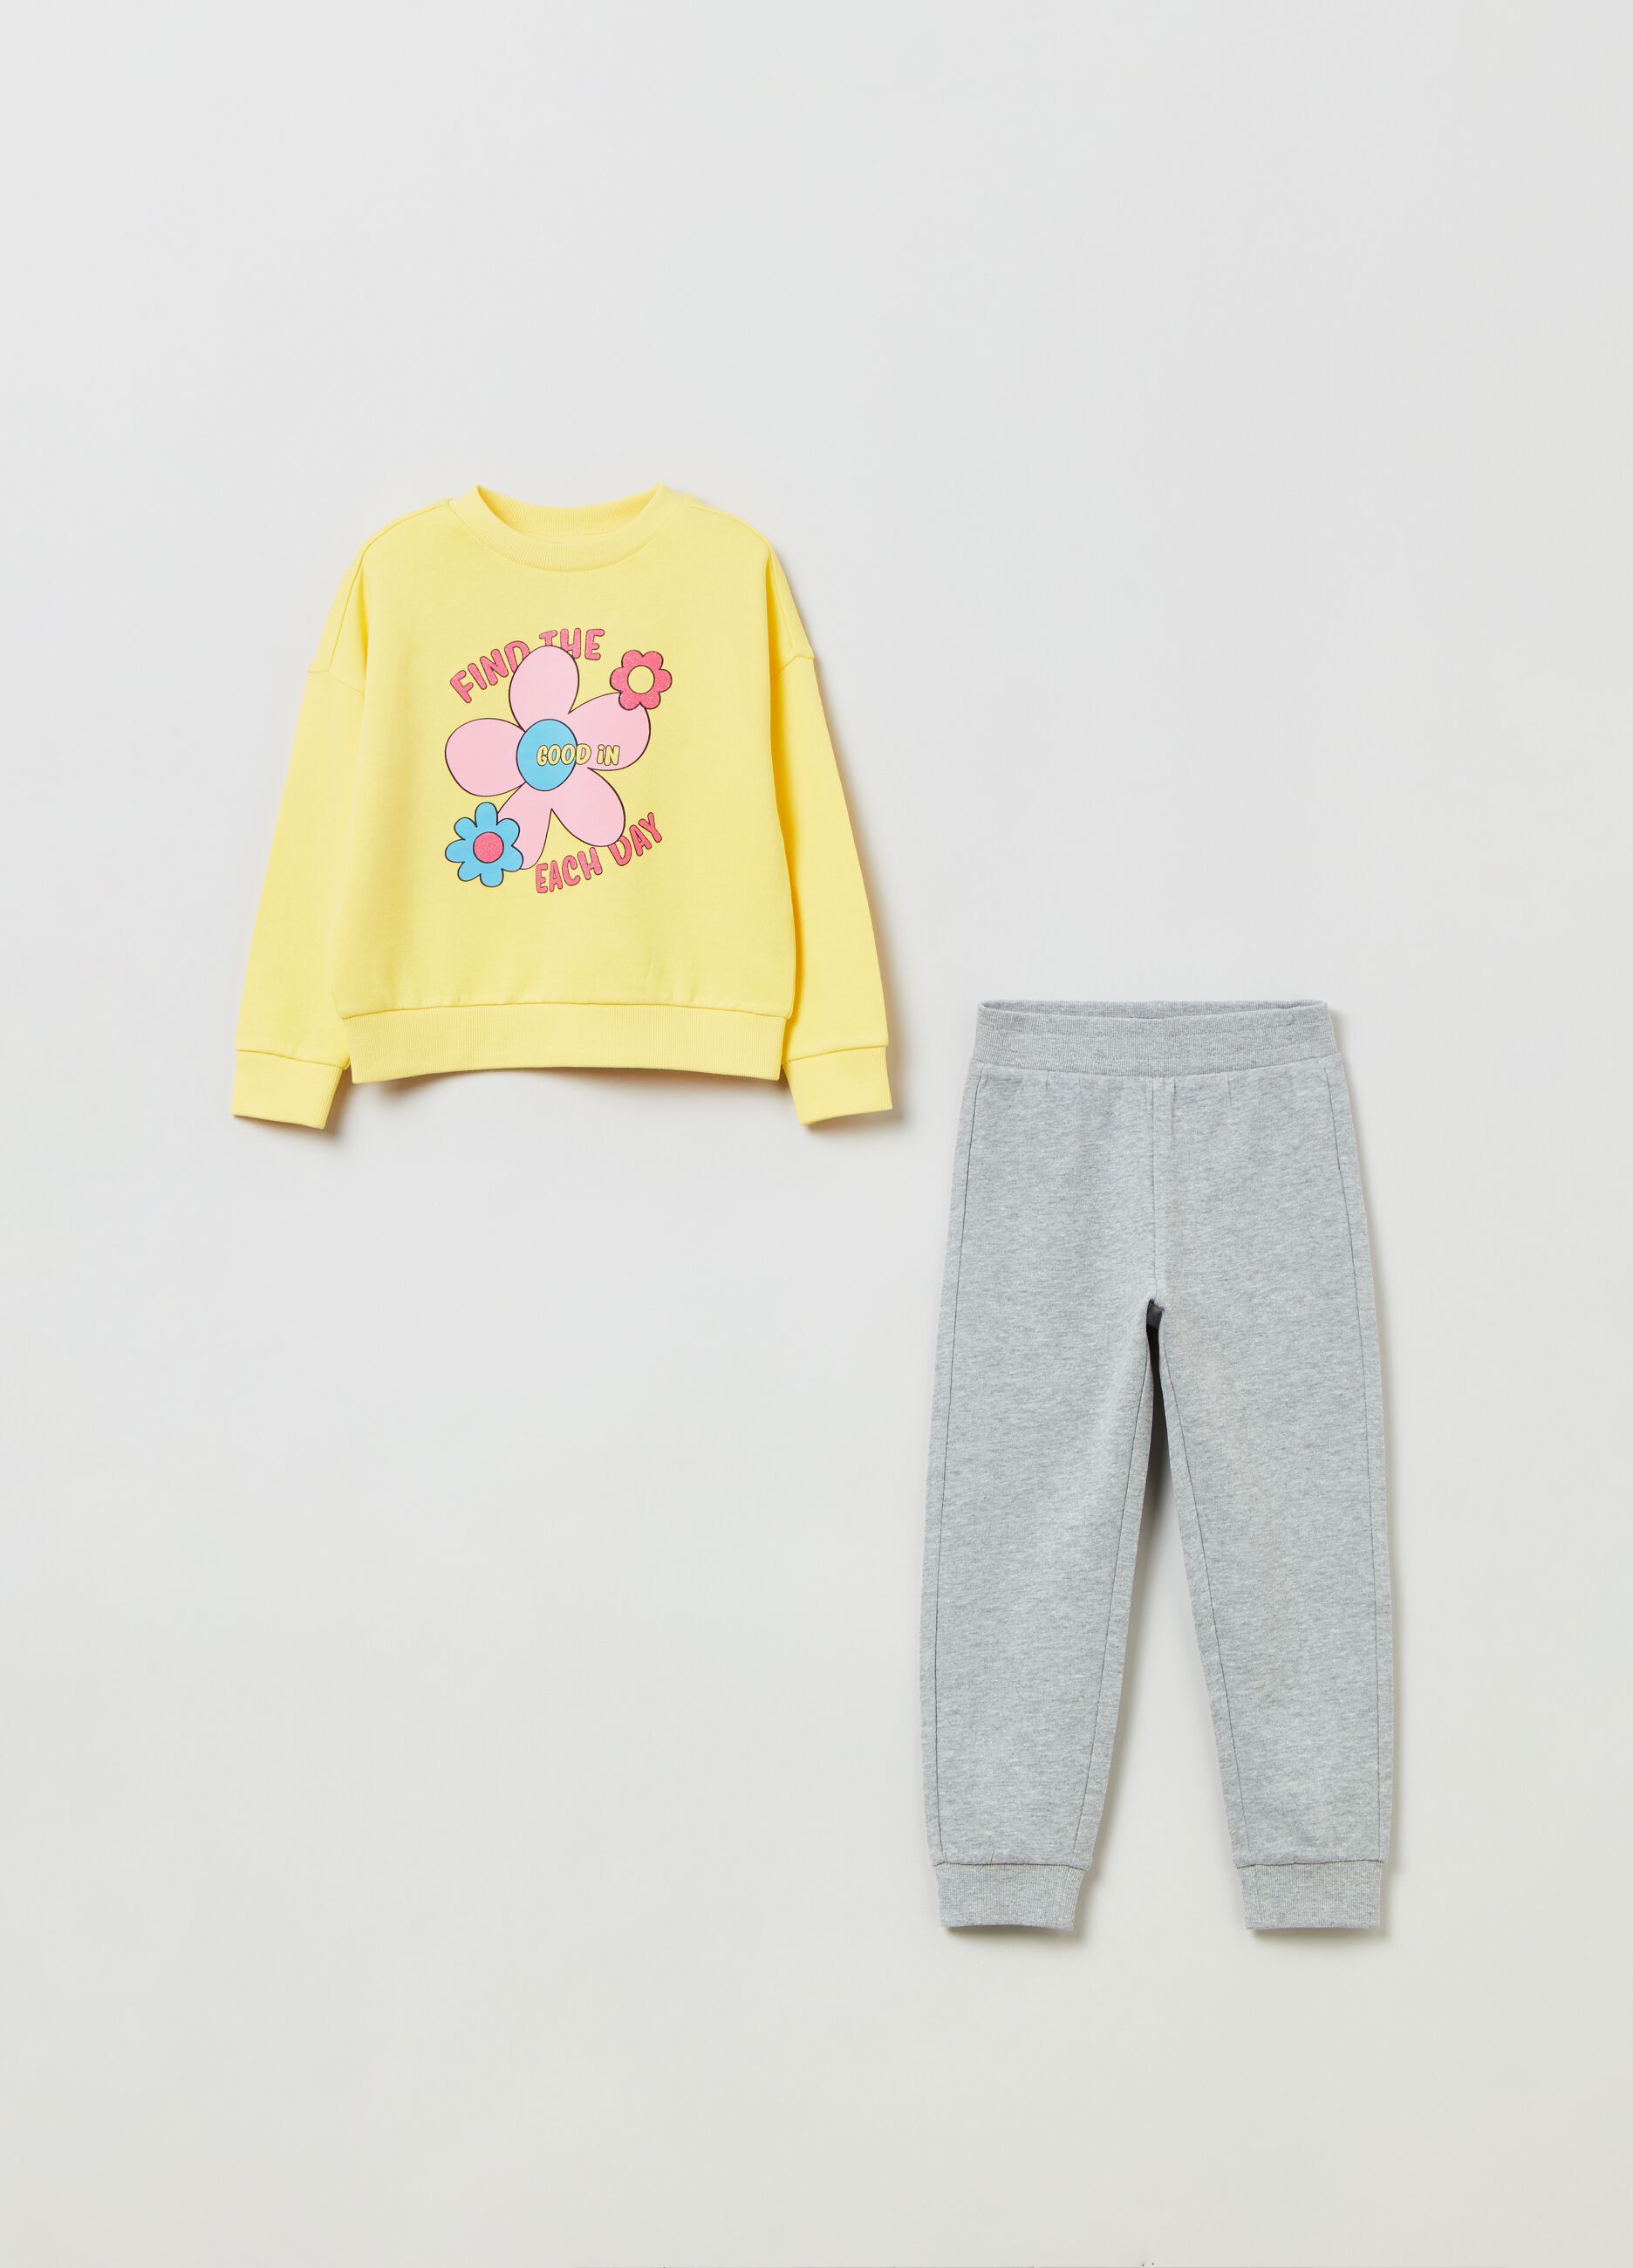 Cotton jogging set with printed lettering